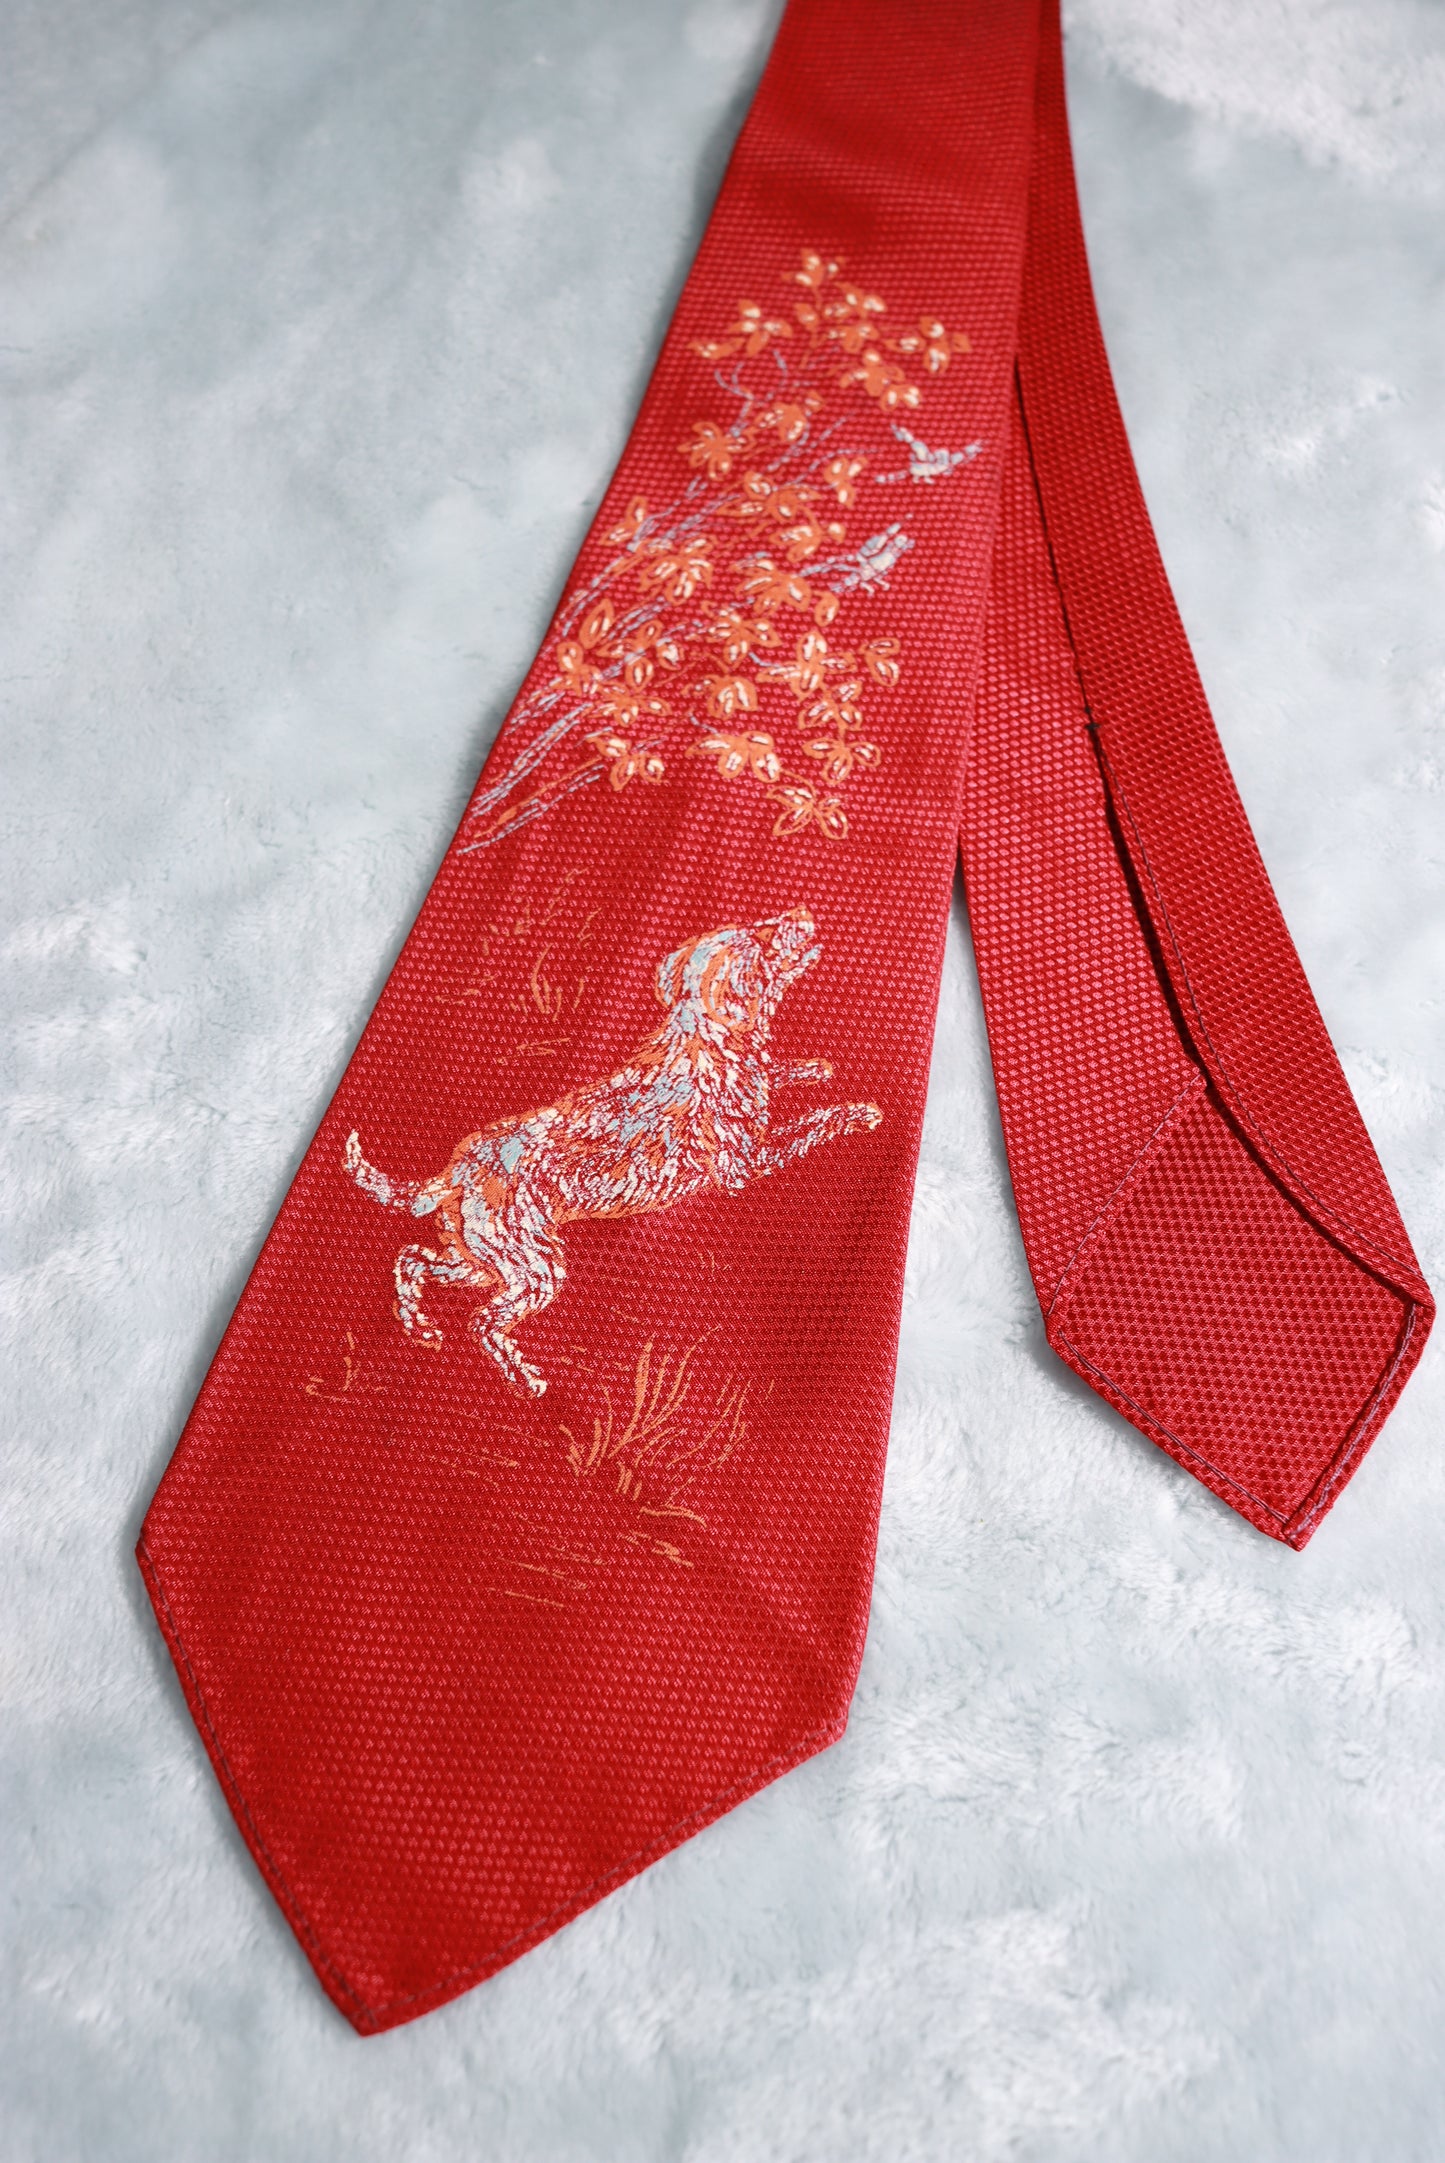 Vintage Towncraft Dog Chasing Birds Swing Tie 1940s/50s